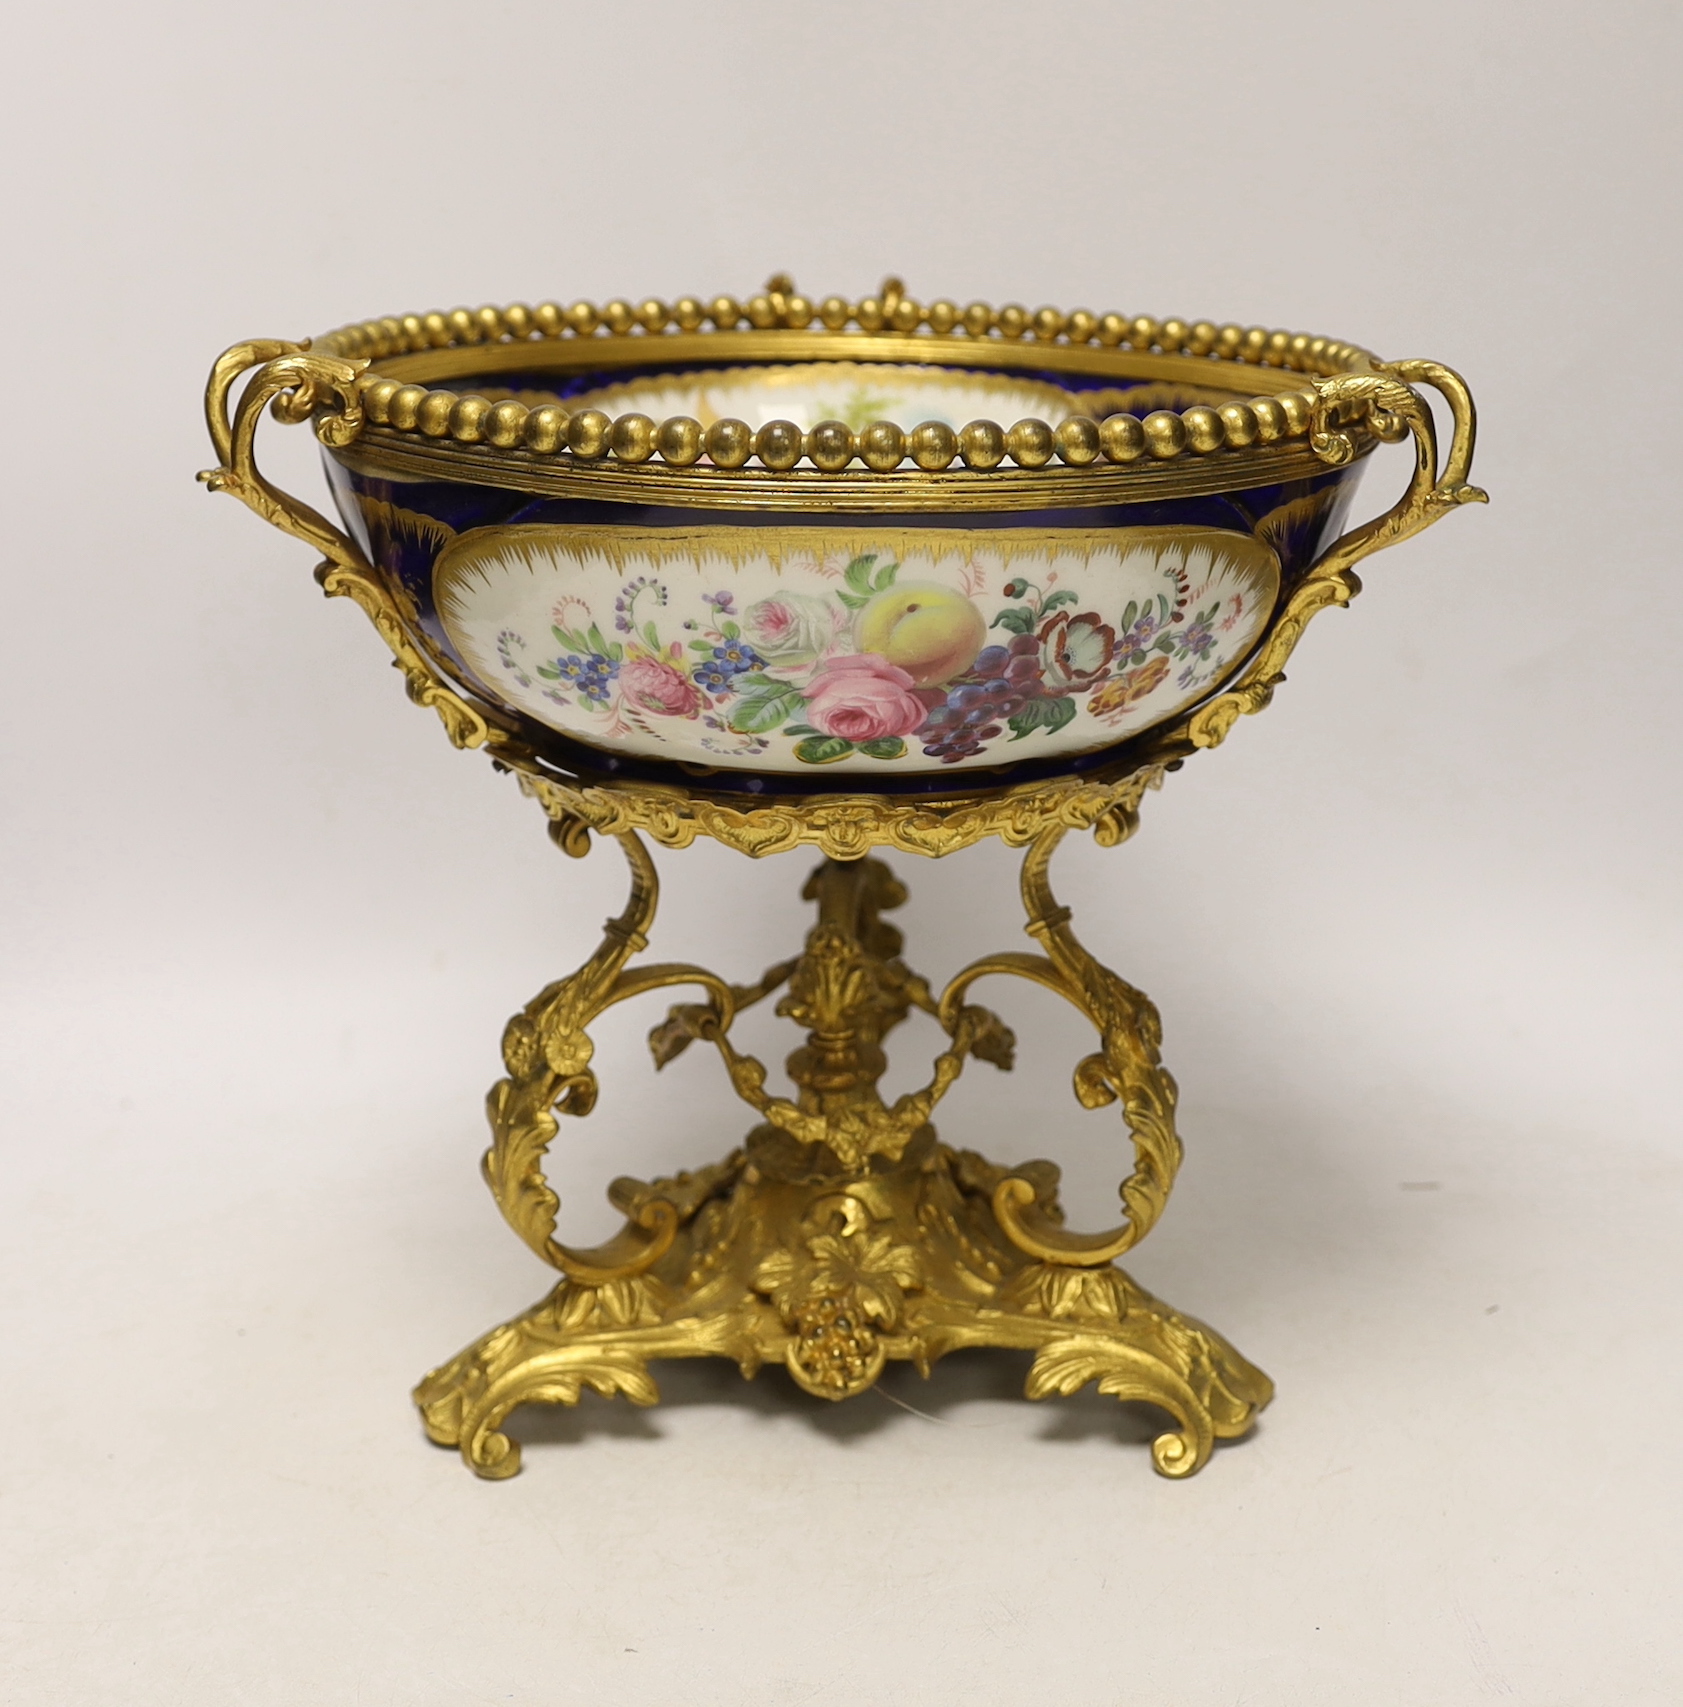 A 19th century ormolu mounted Sevres style porcelain bowl, 25cm